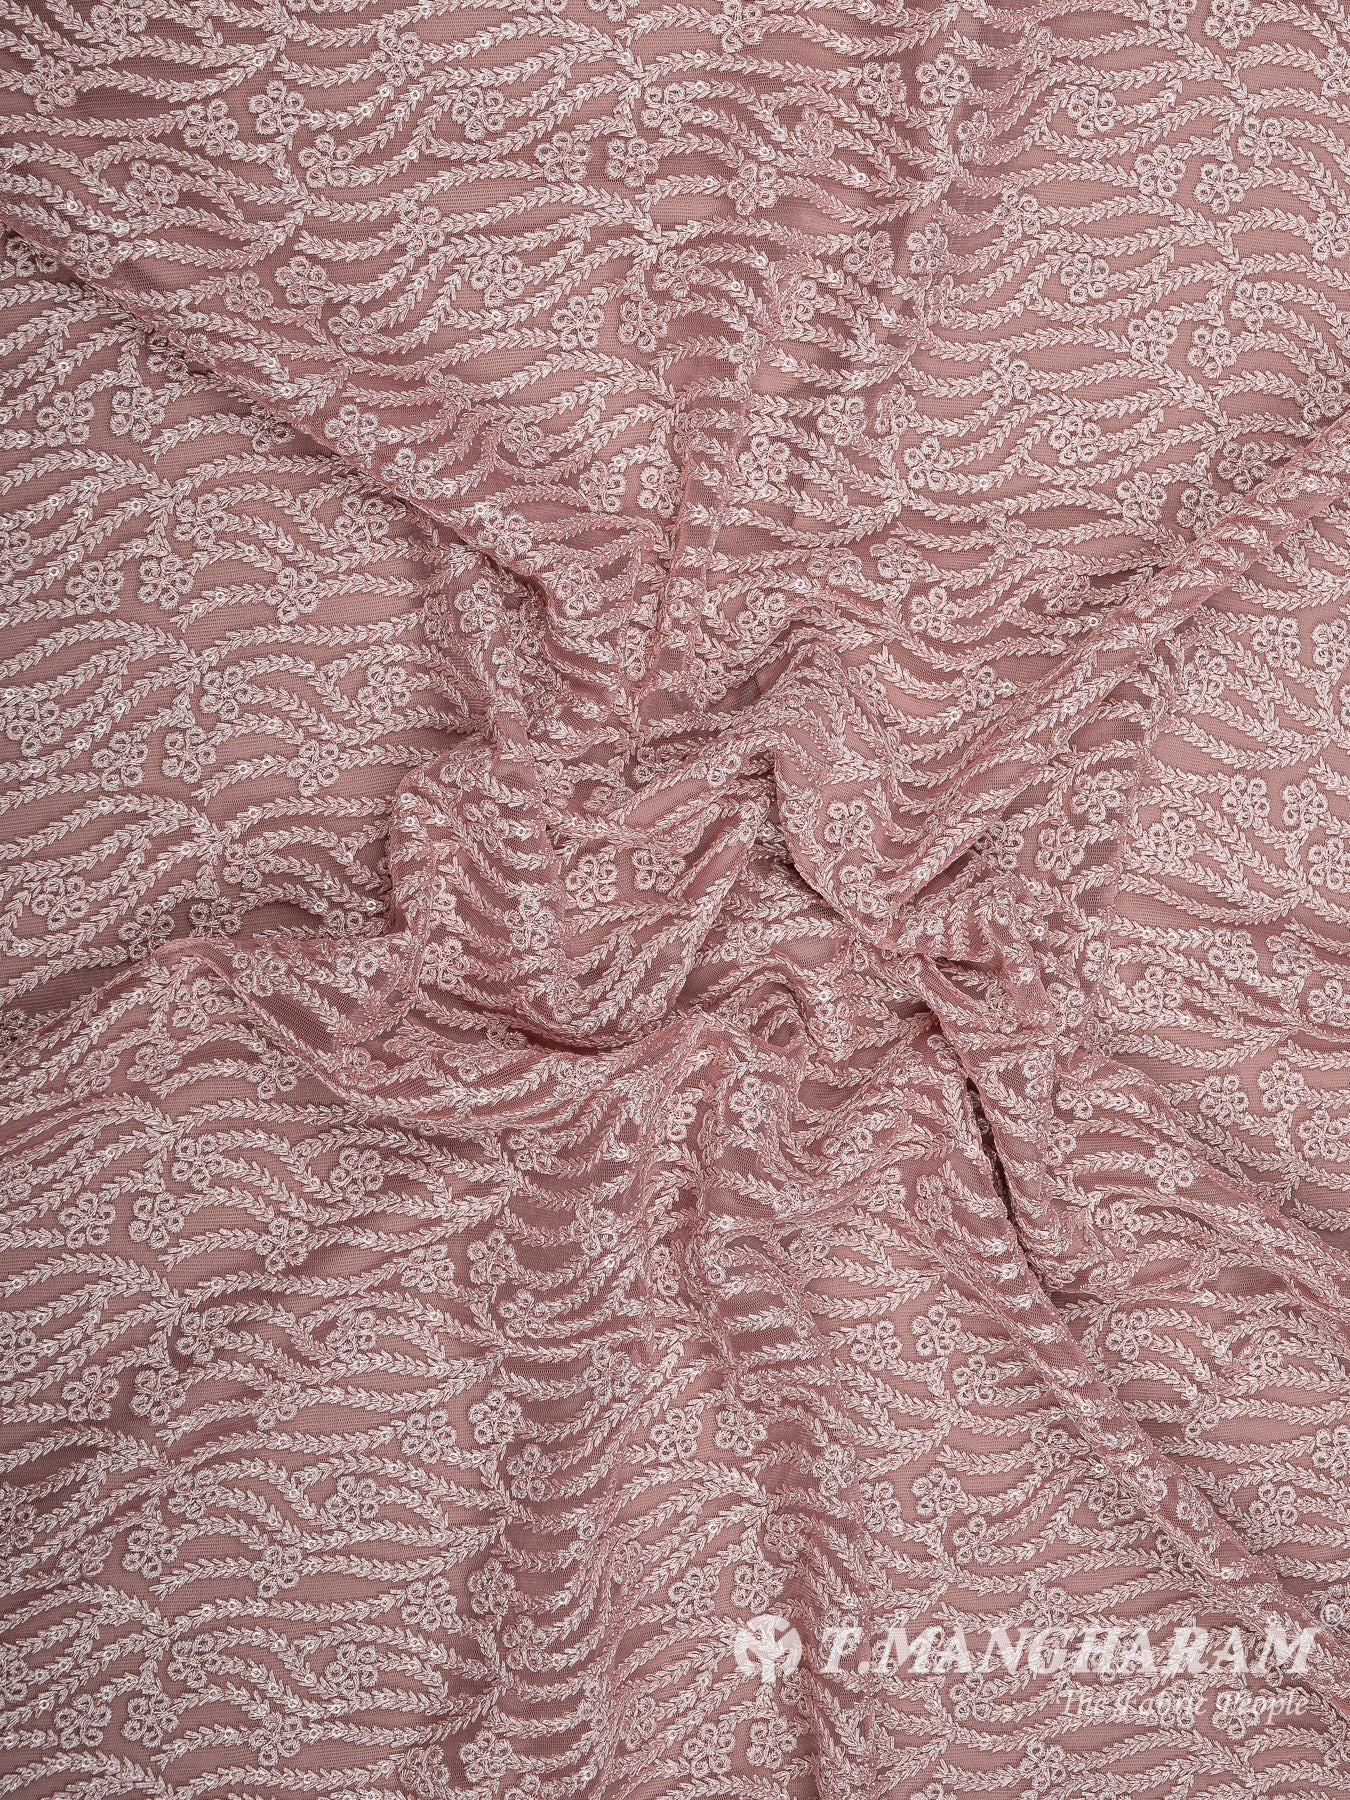 Peach Net Embroidery Fabric - EC8431 view-4